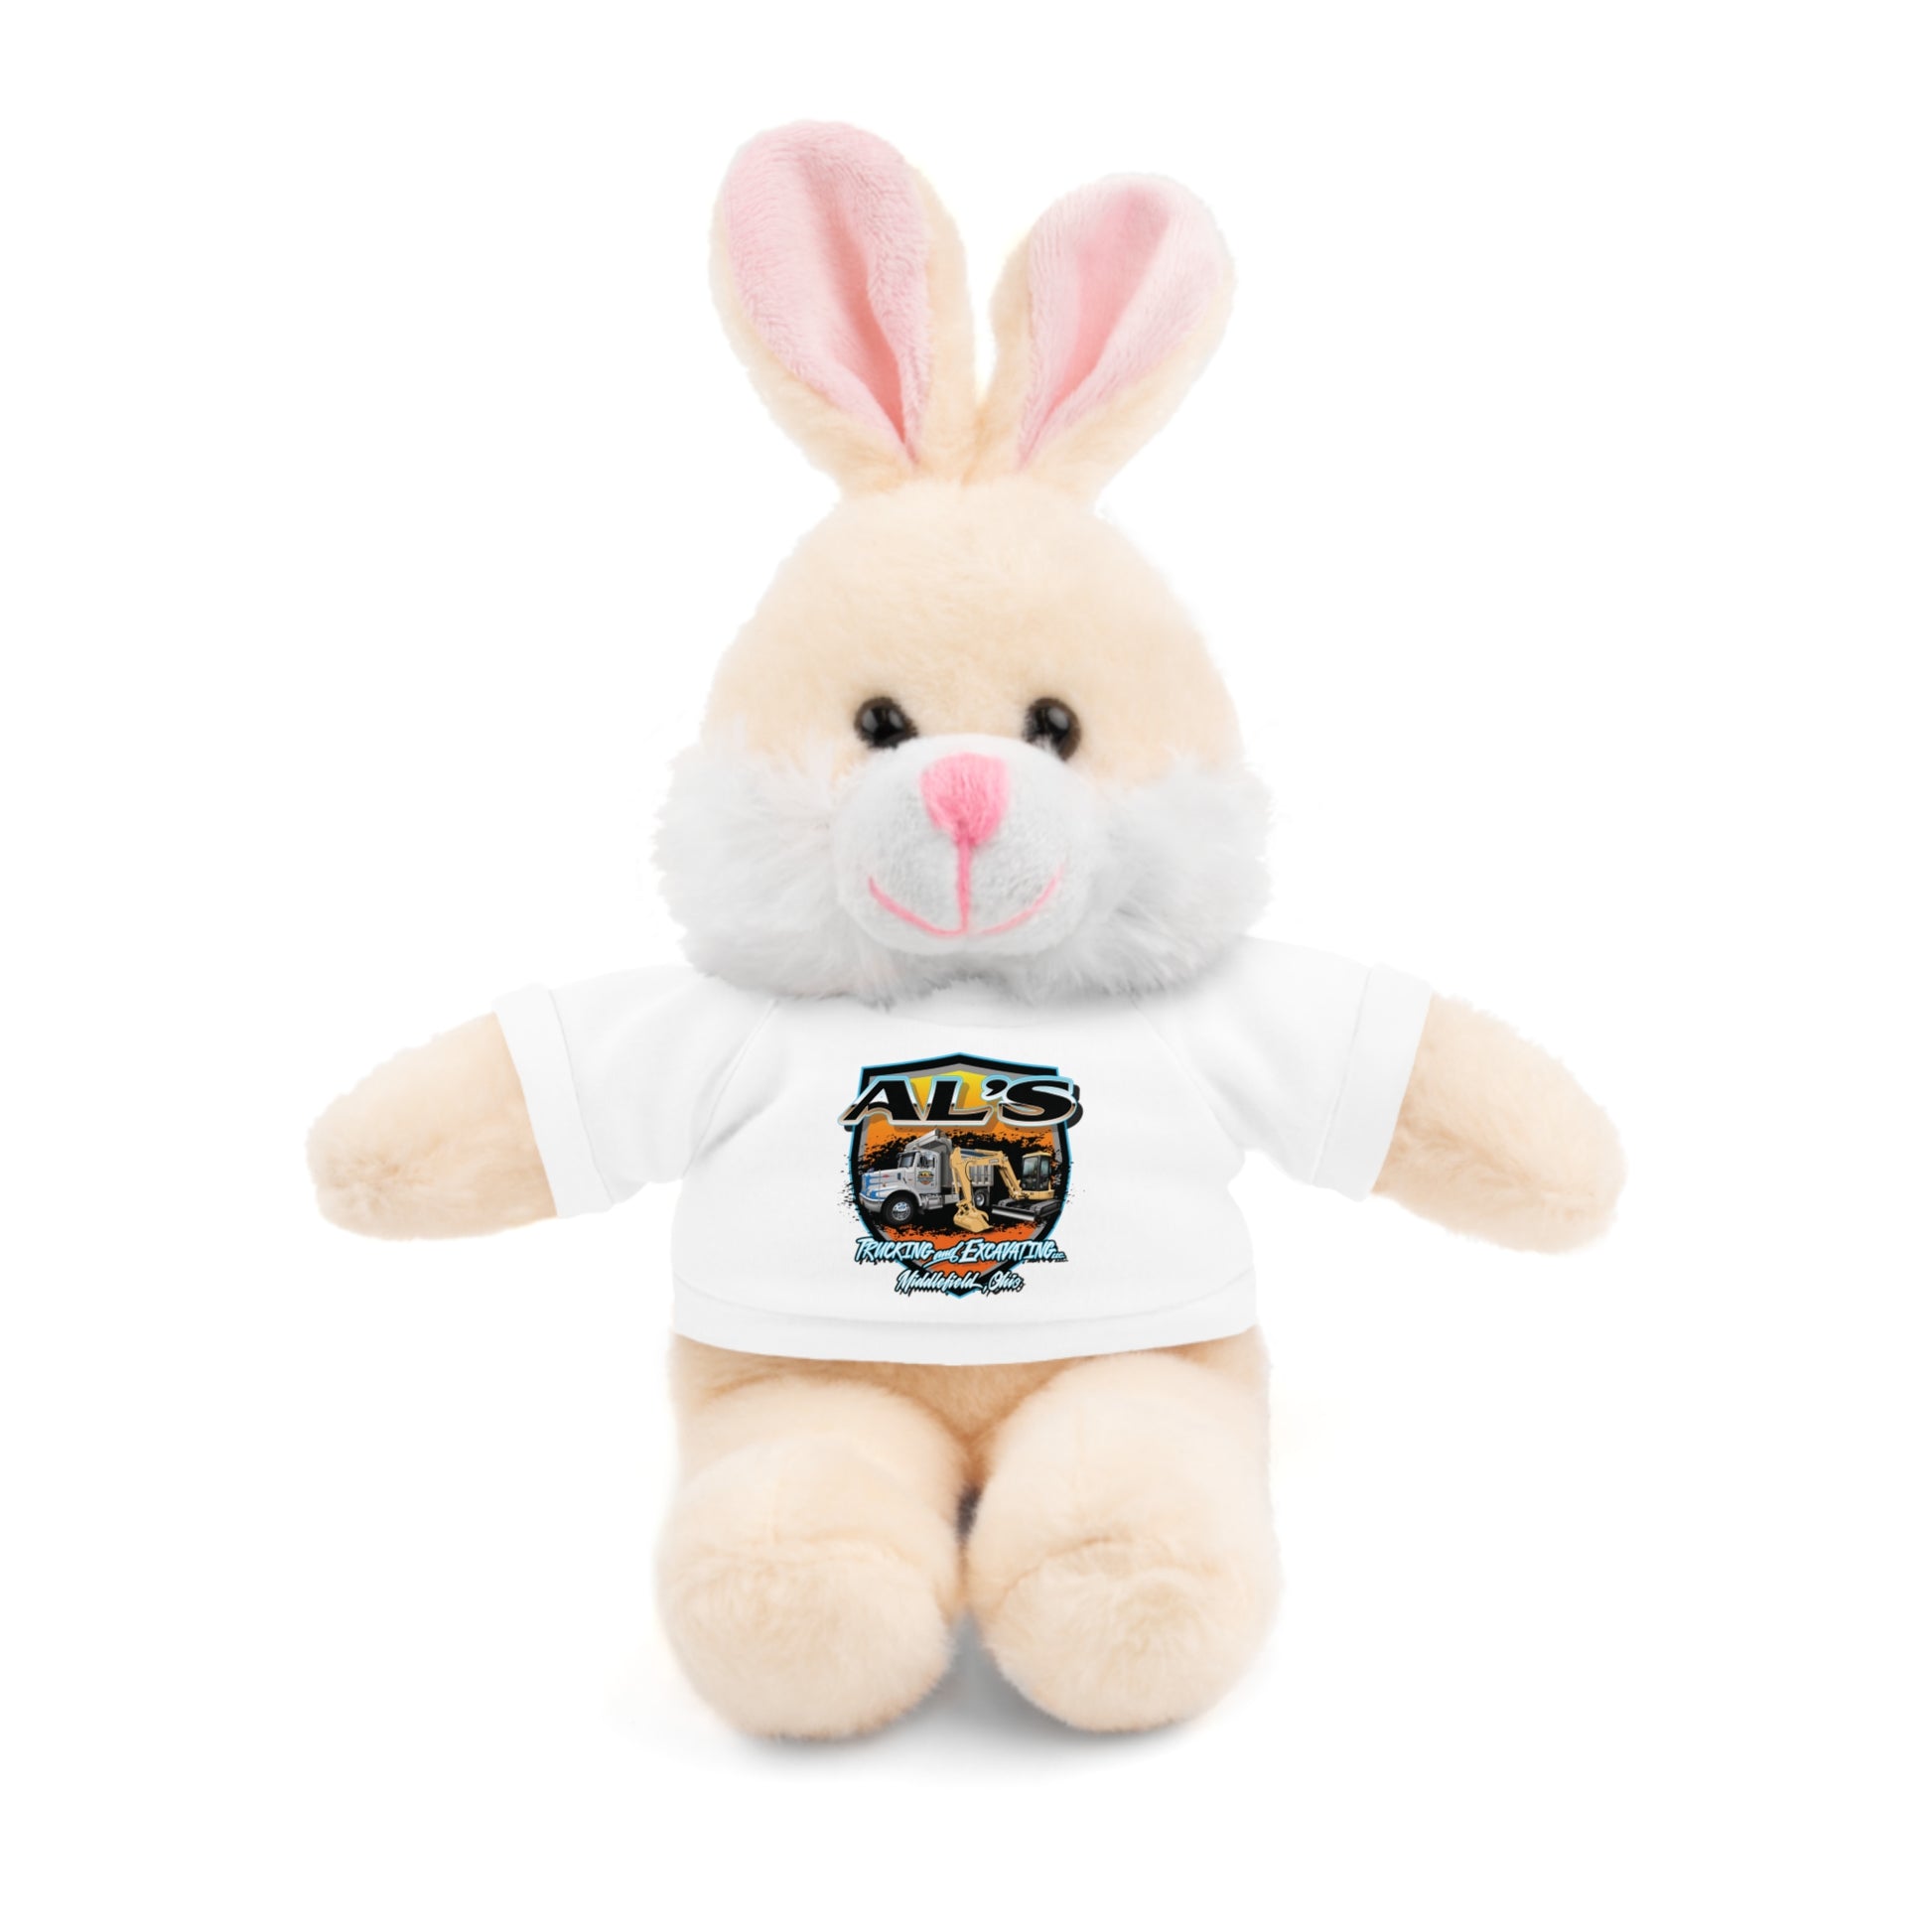 Al's Trucking and Excavating - Stuffed Animals with Tee - OCDandApparel